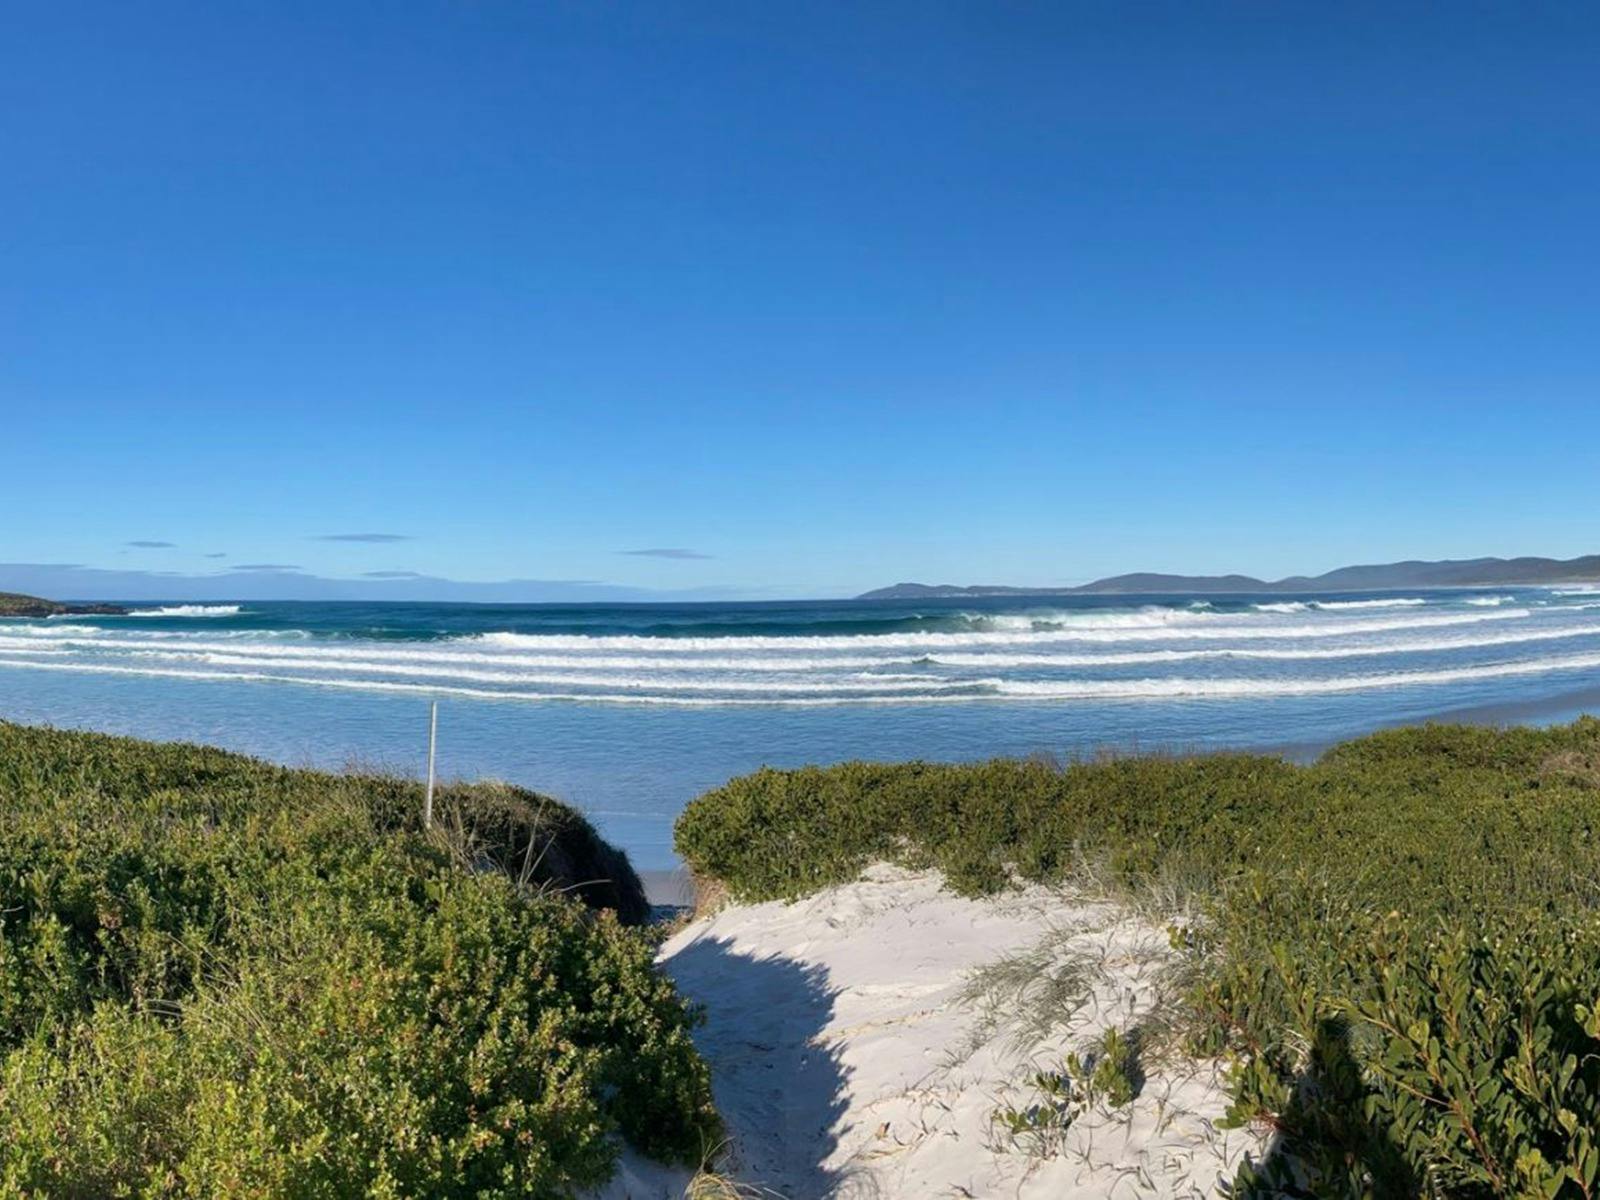 5 minutes walk to Maclean beach. Popular with locals for great surfing and fishing